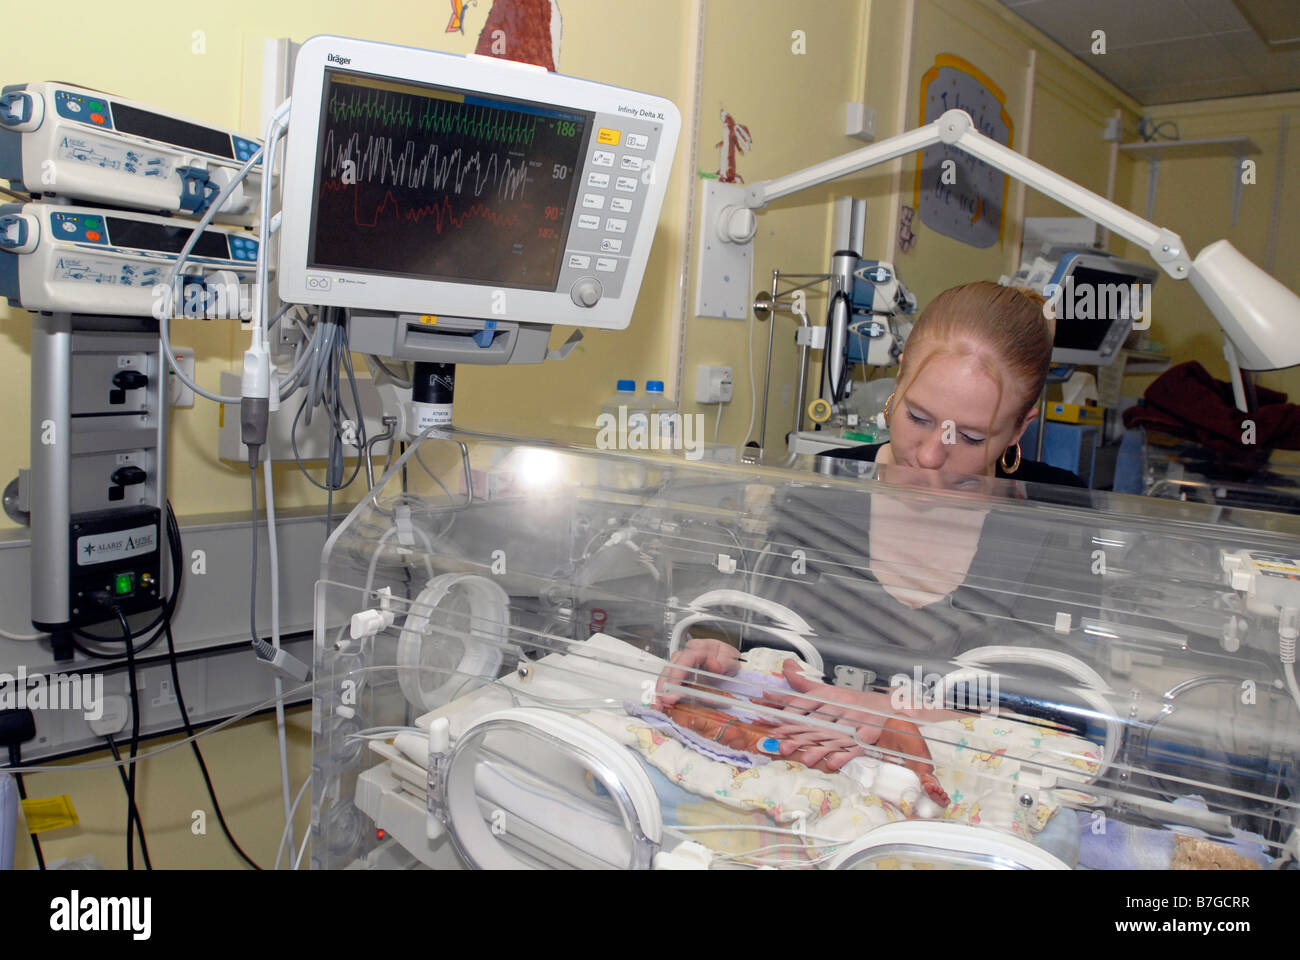 Mum looks after her premature baby UK Stock Photo